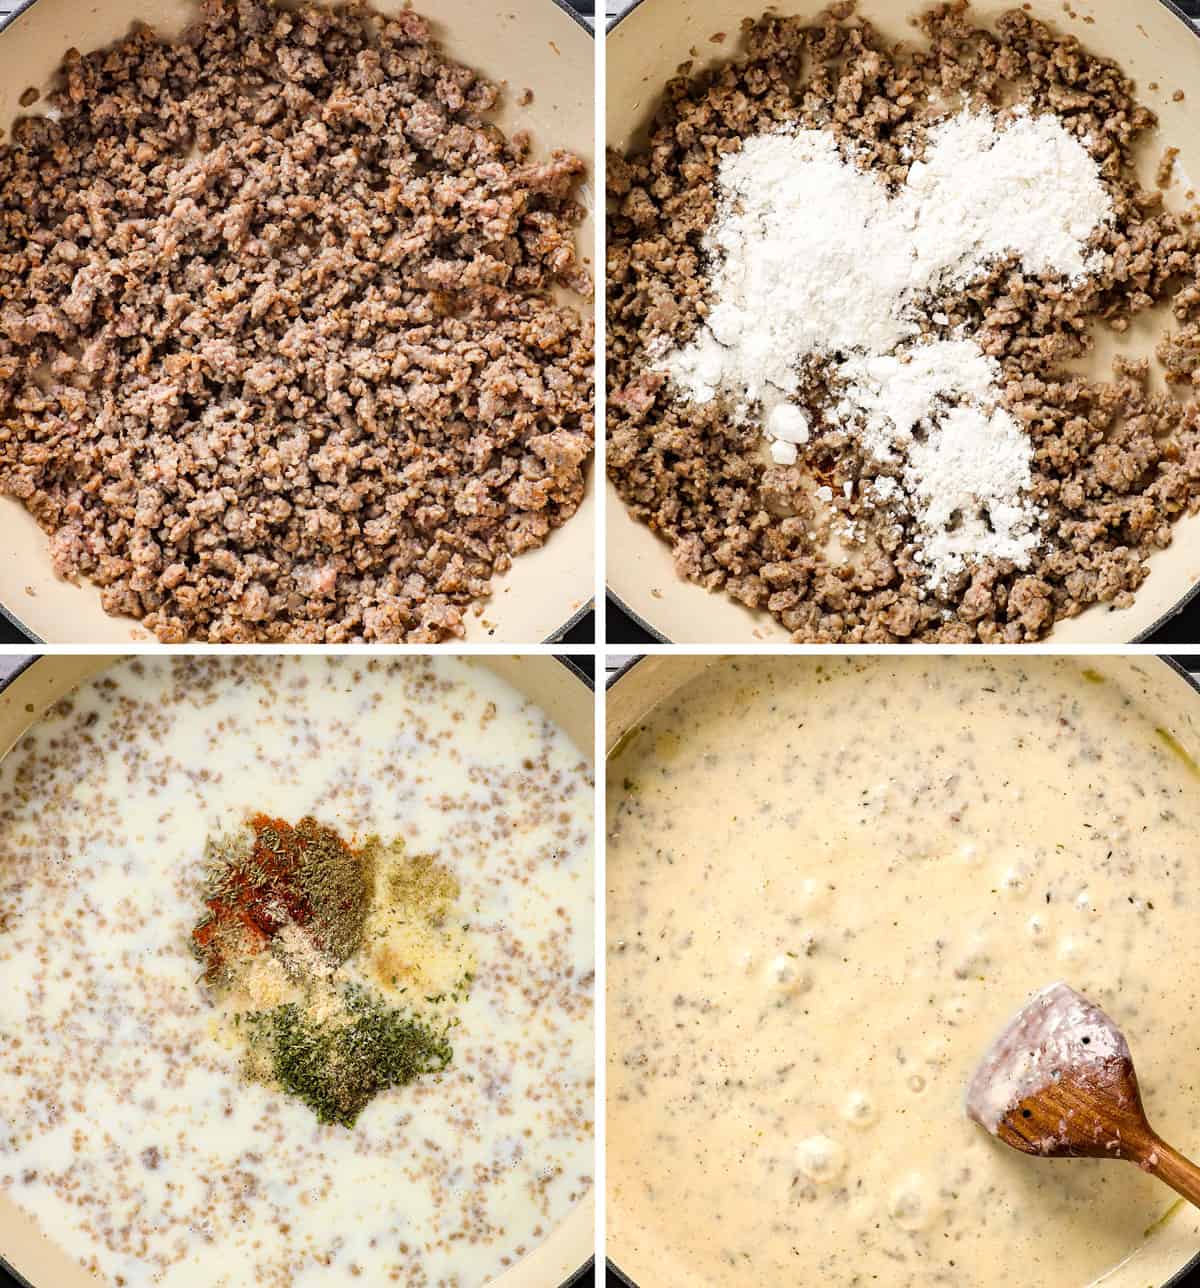 a collage showing how to make biscuit and gravy casserole by browning sausage, adding flour to make a roux, adding milk and spices, then simmering to thicken